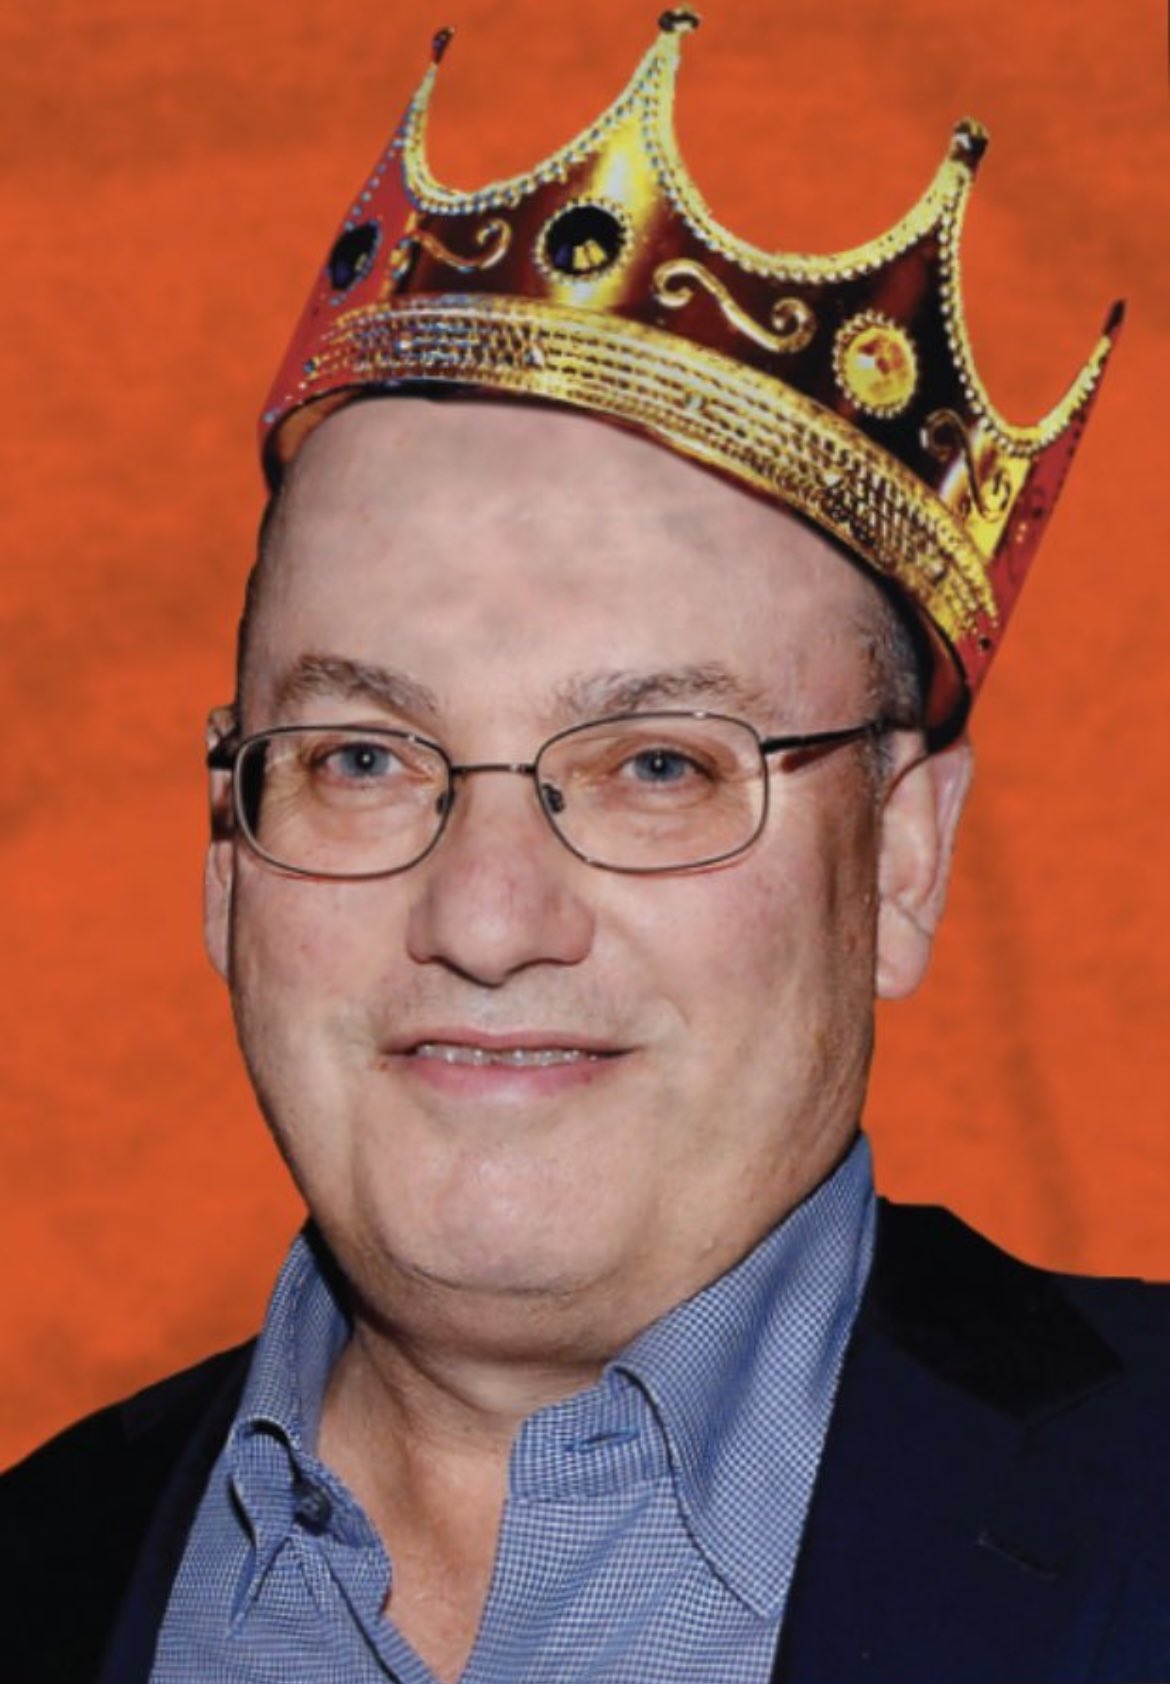 photoshopped picture of Mets owner Steve Cohen with crown on